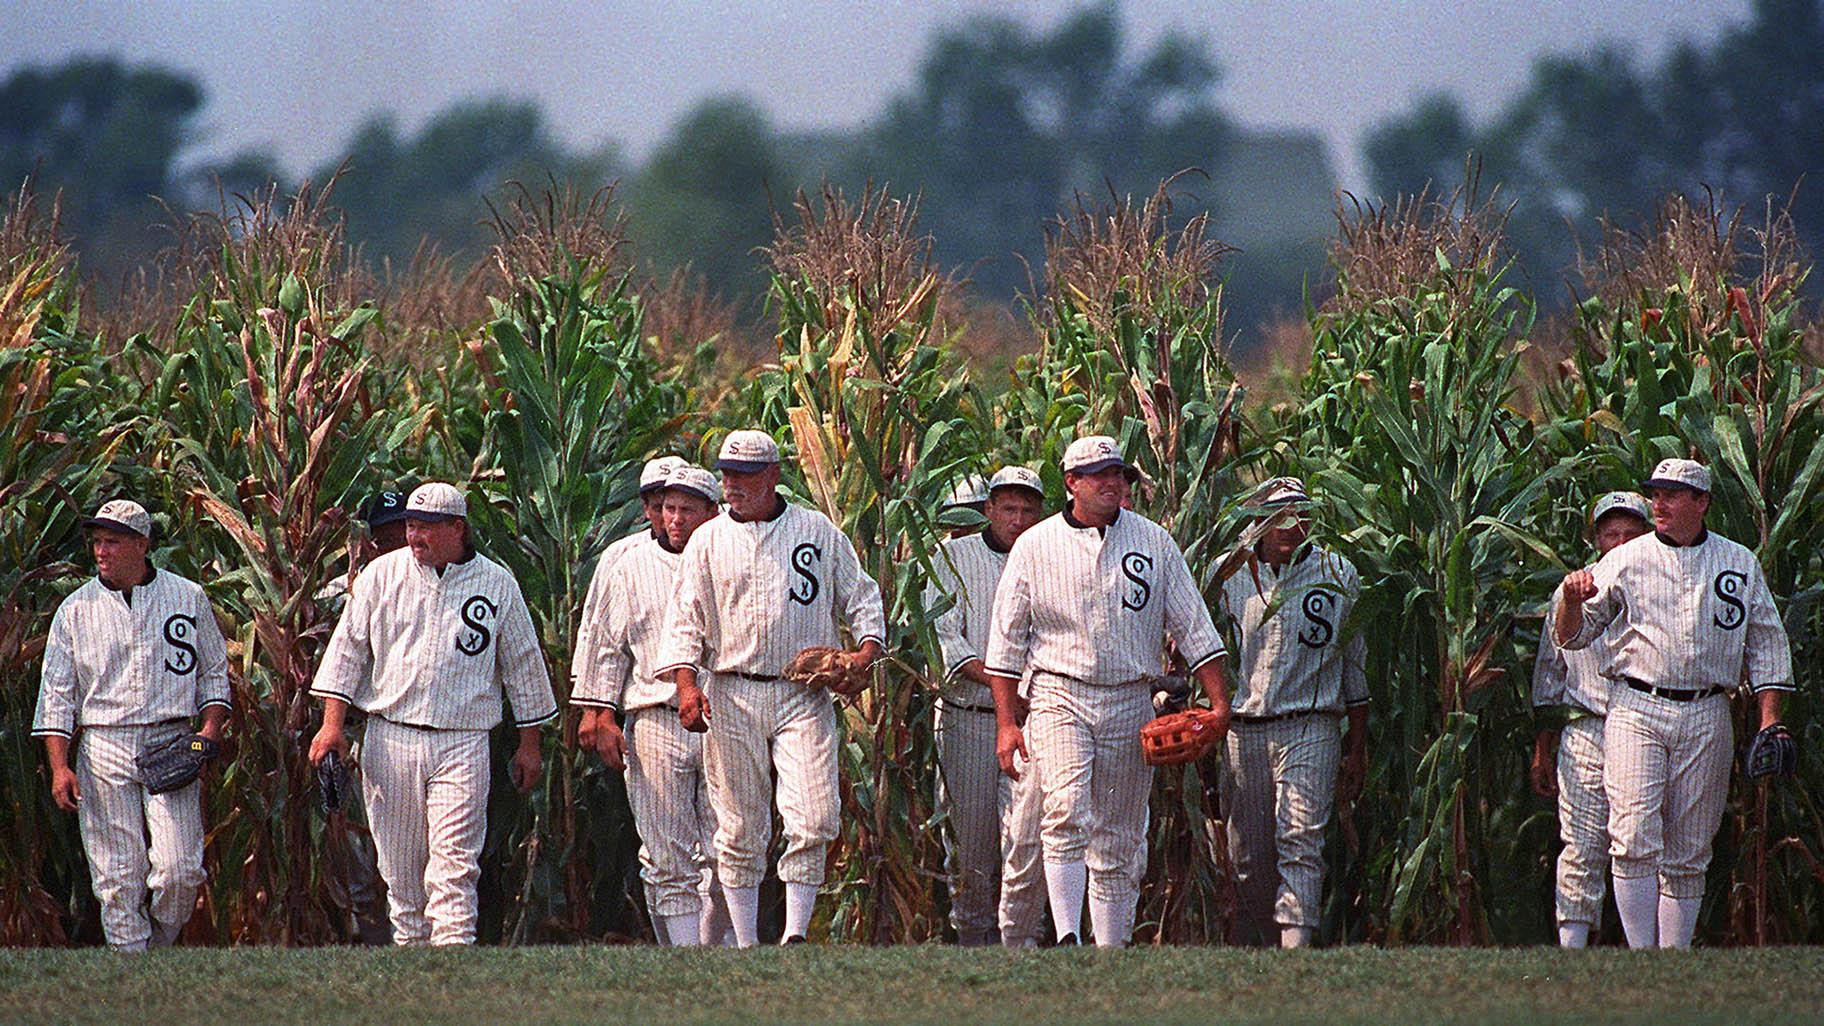 White Sox, Yankees to play at 'Field of Dreams' in 2020